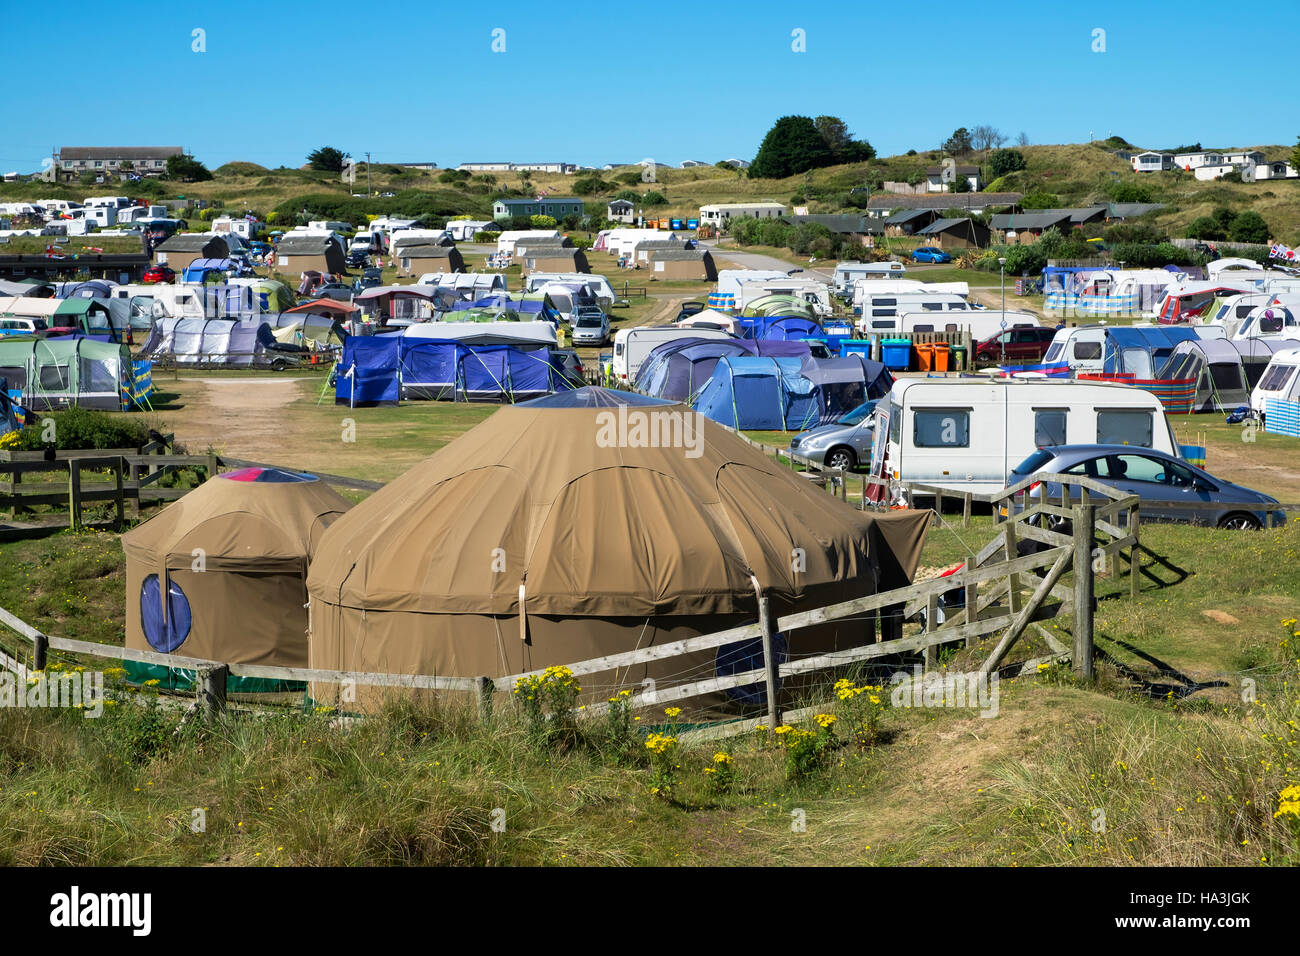 Tents and caravans at Perran sands holiday camp in Perranporth, Cornwall, UK Stock Photo